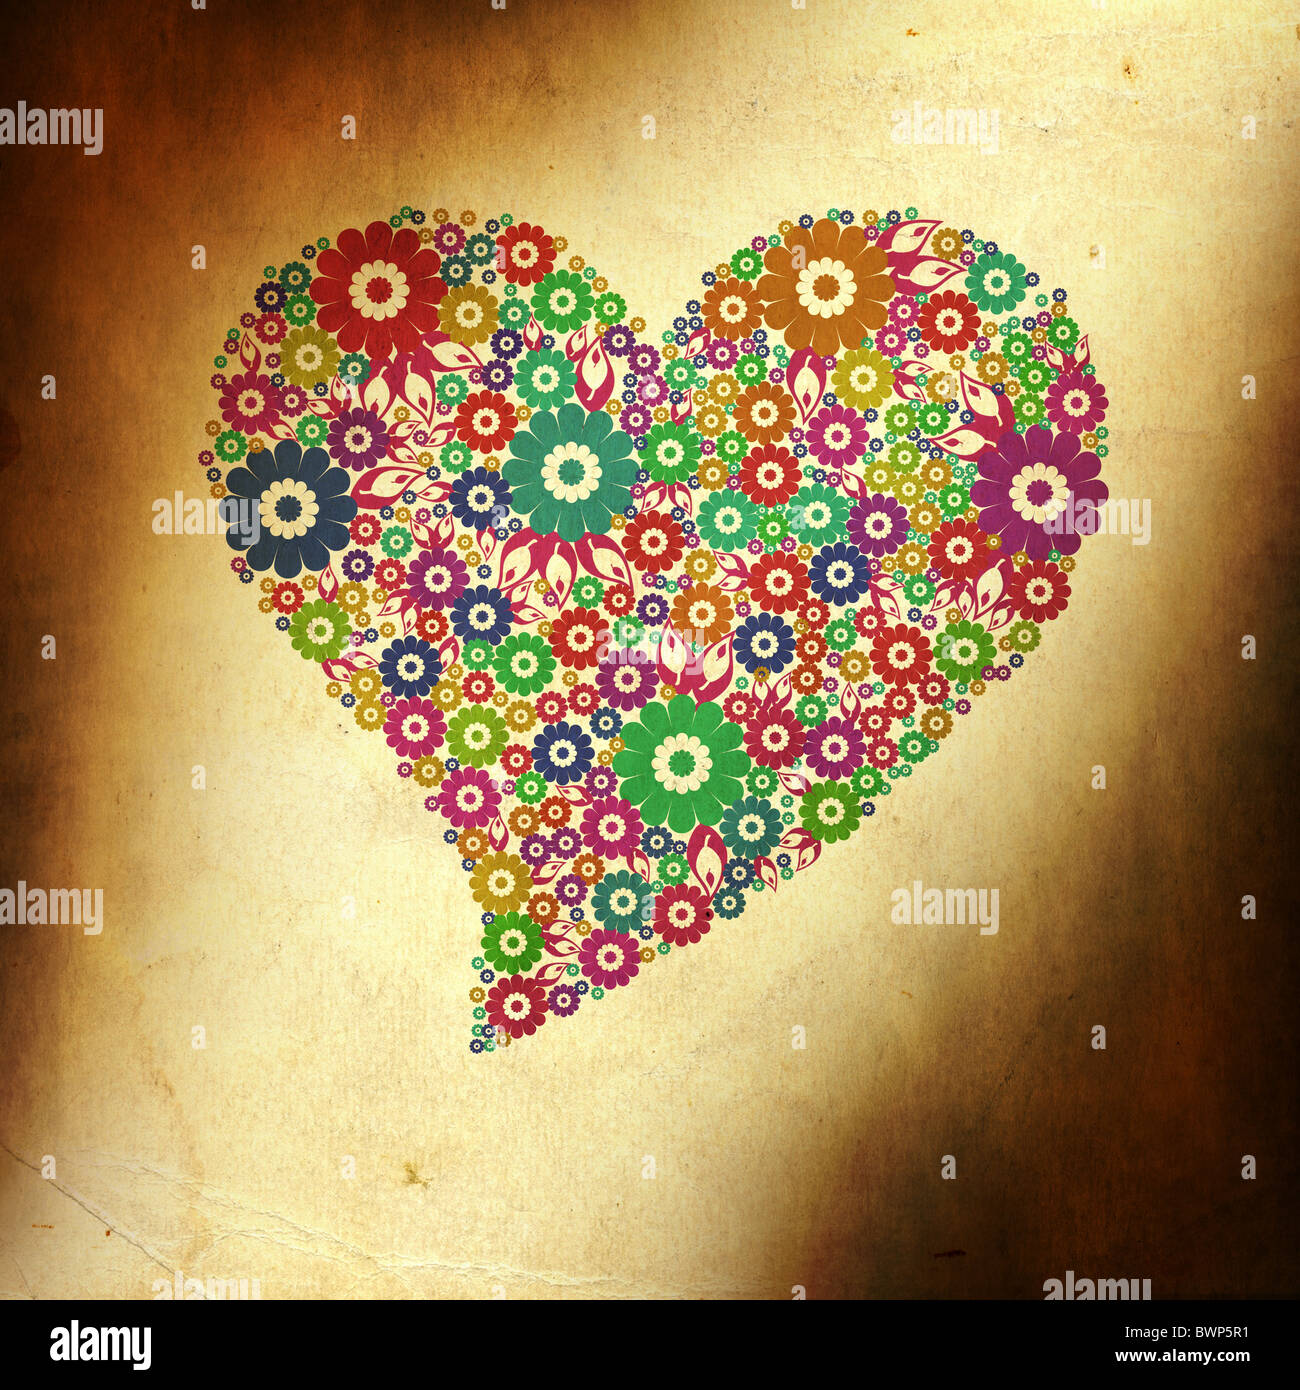 Grunge background with colorful heart of flower Stock Photo